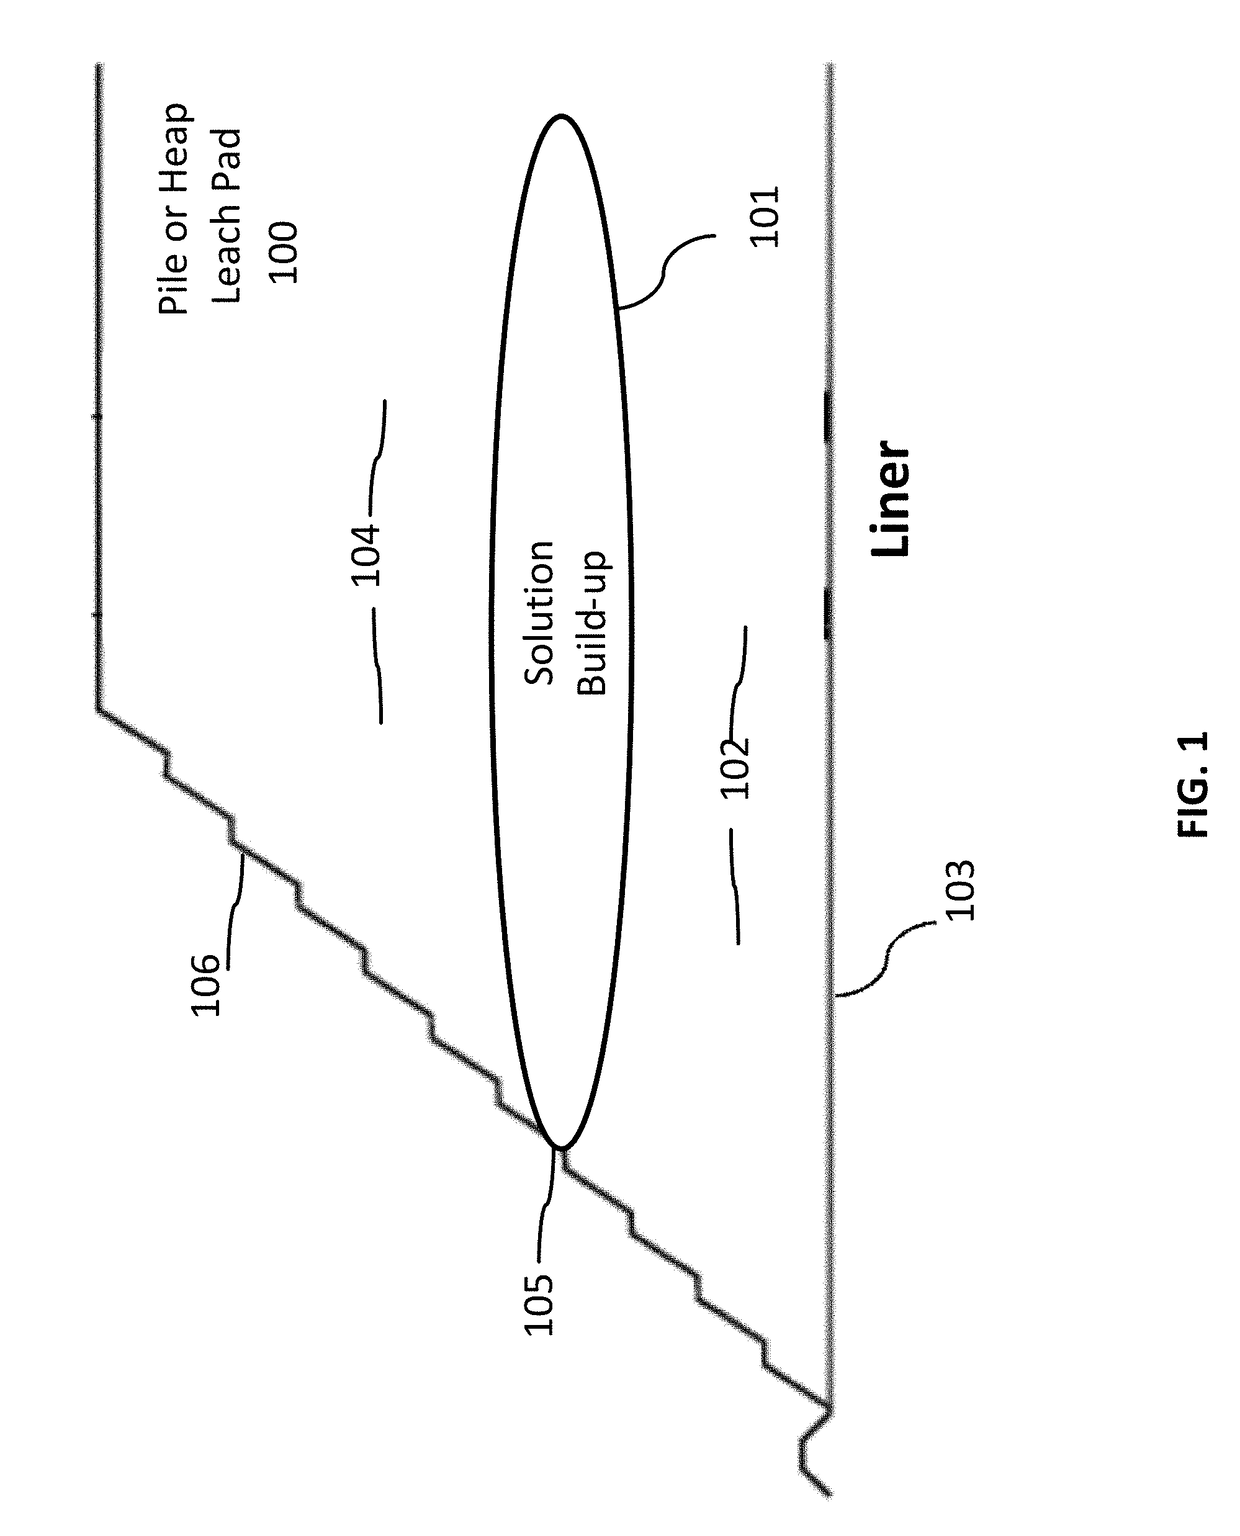 Systems and methods for improvement of metal recovery and stability of piles